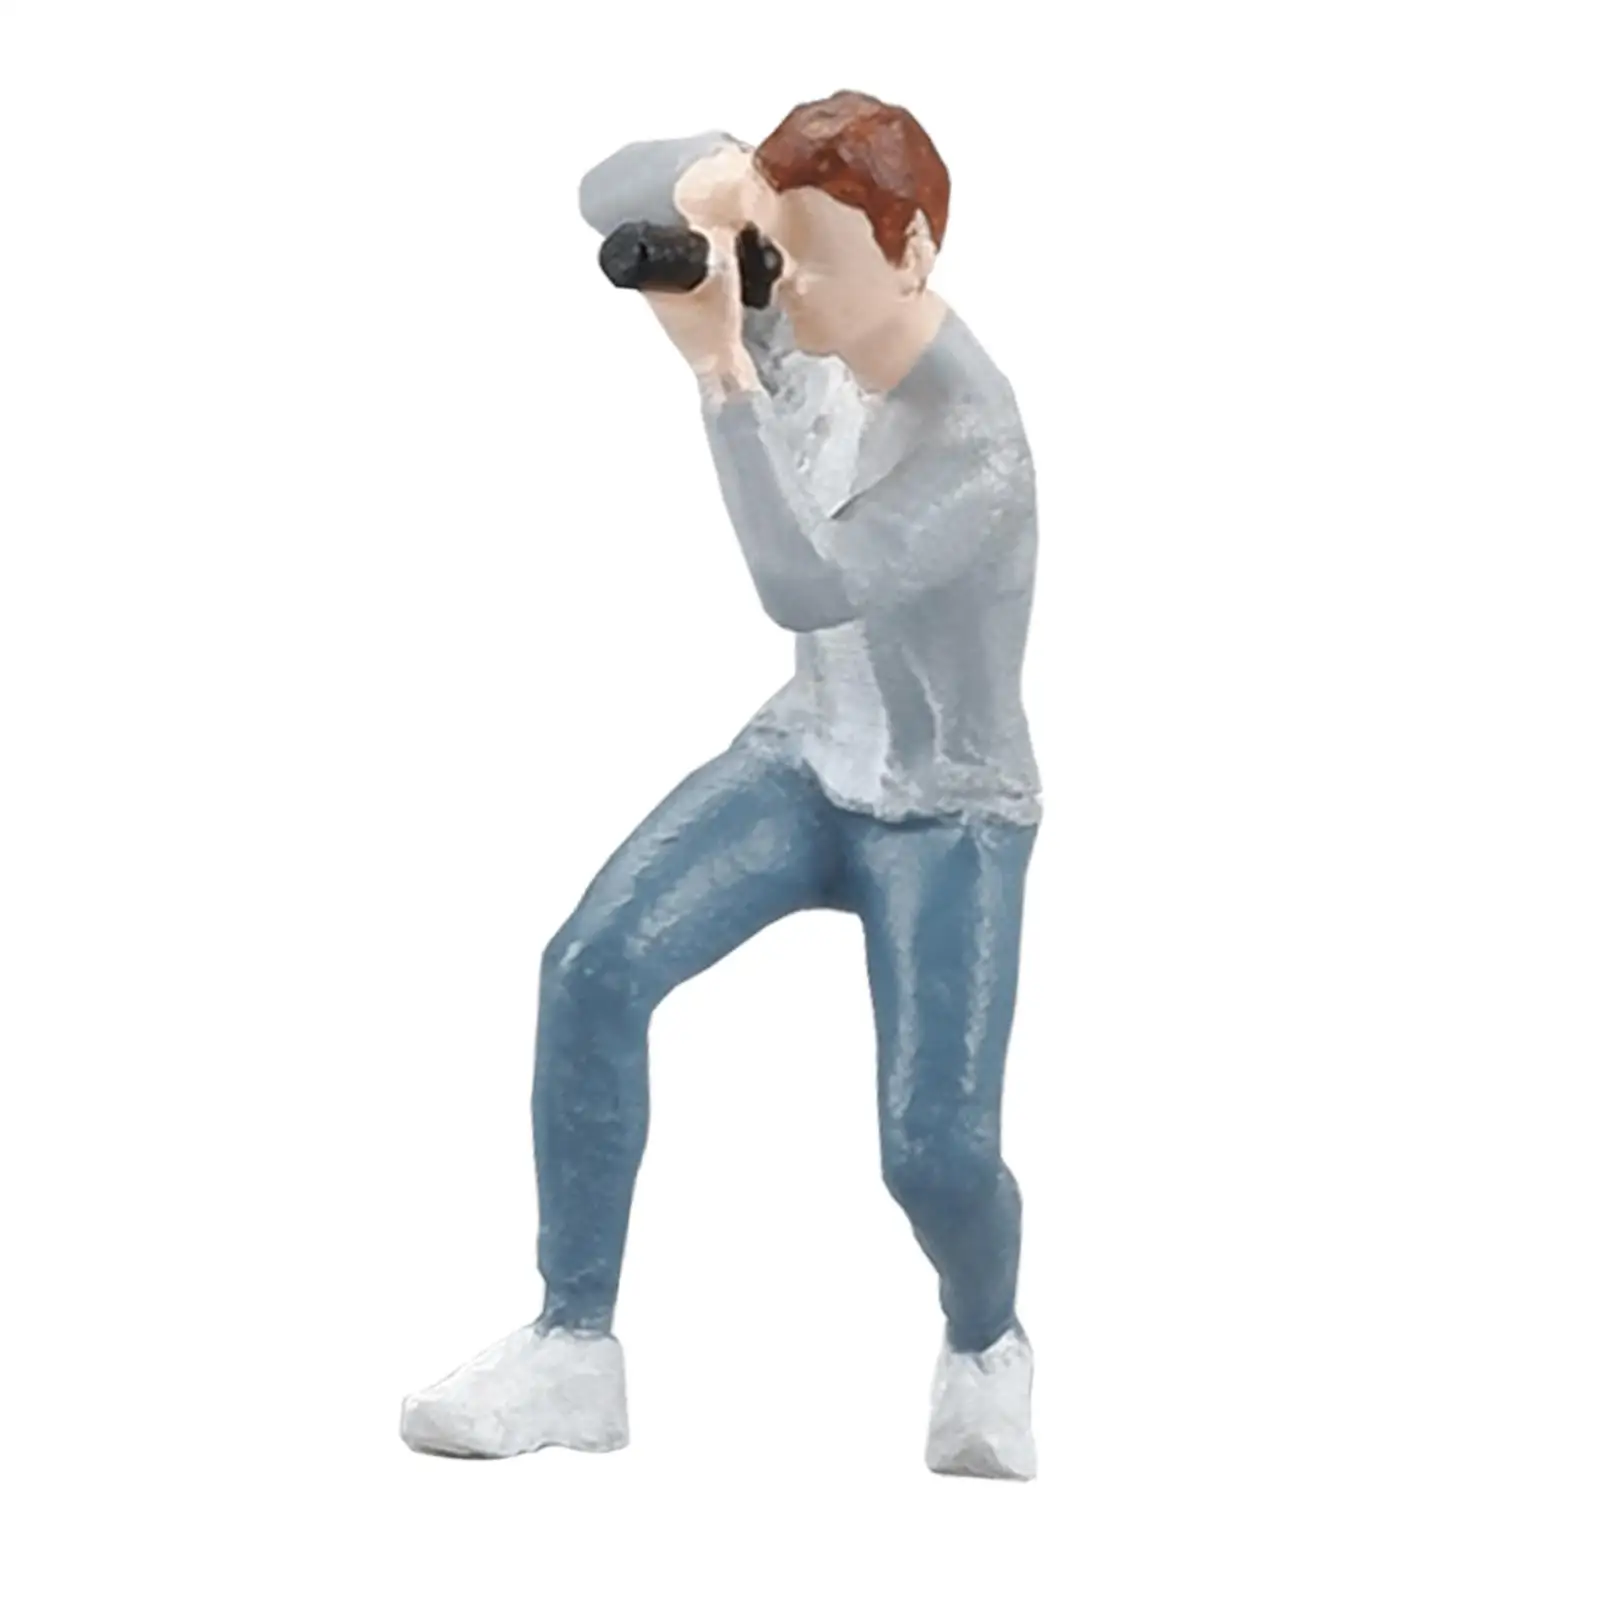 1/64 Miniature Figure Painted Photographer for Model Train Dollhouse Accessories Architecture Model Photo Props DIY Projects